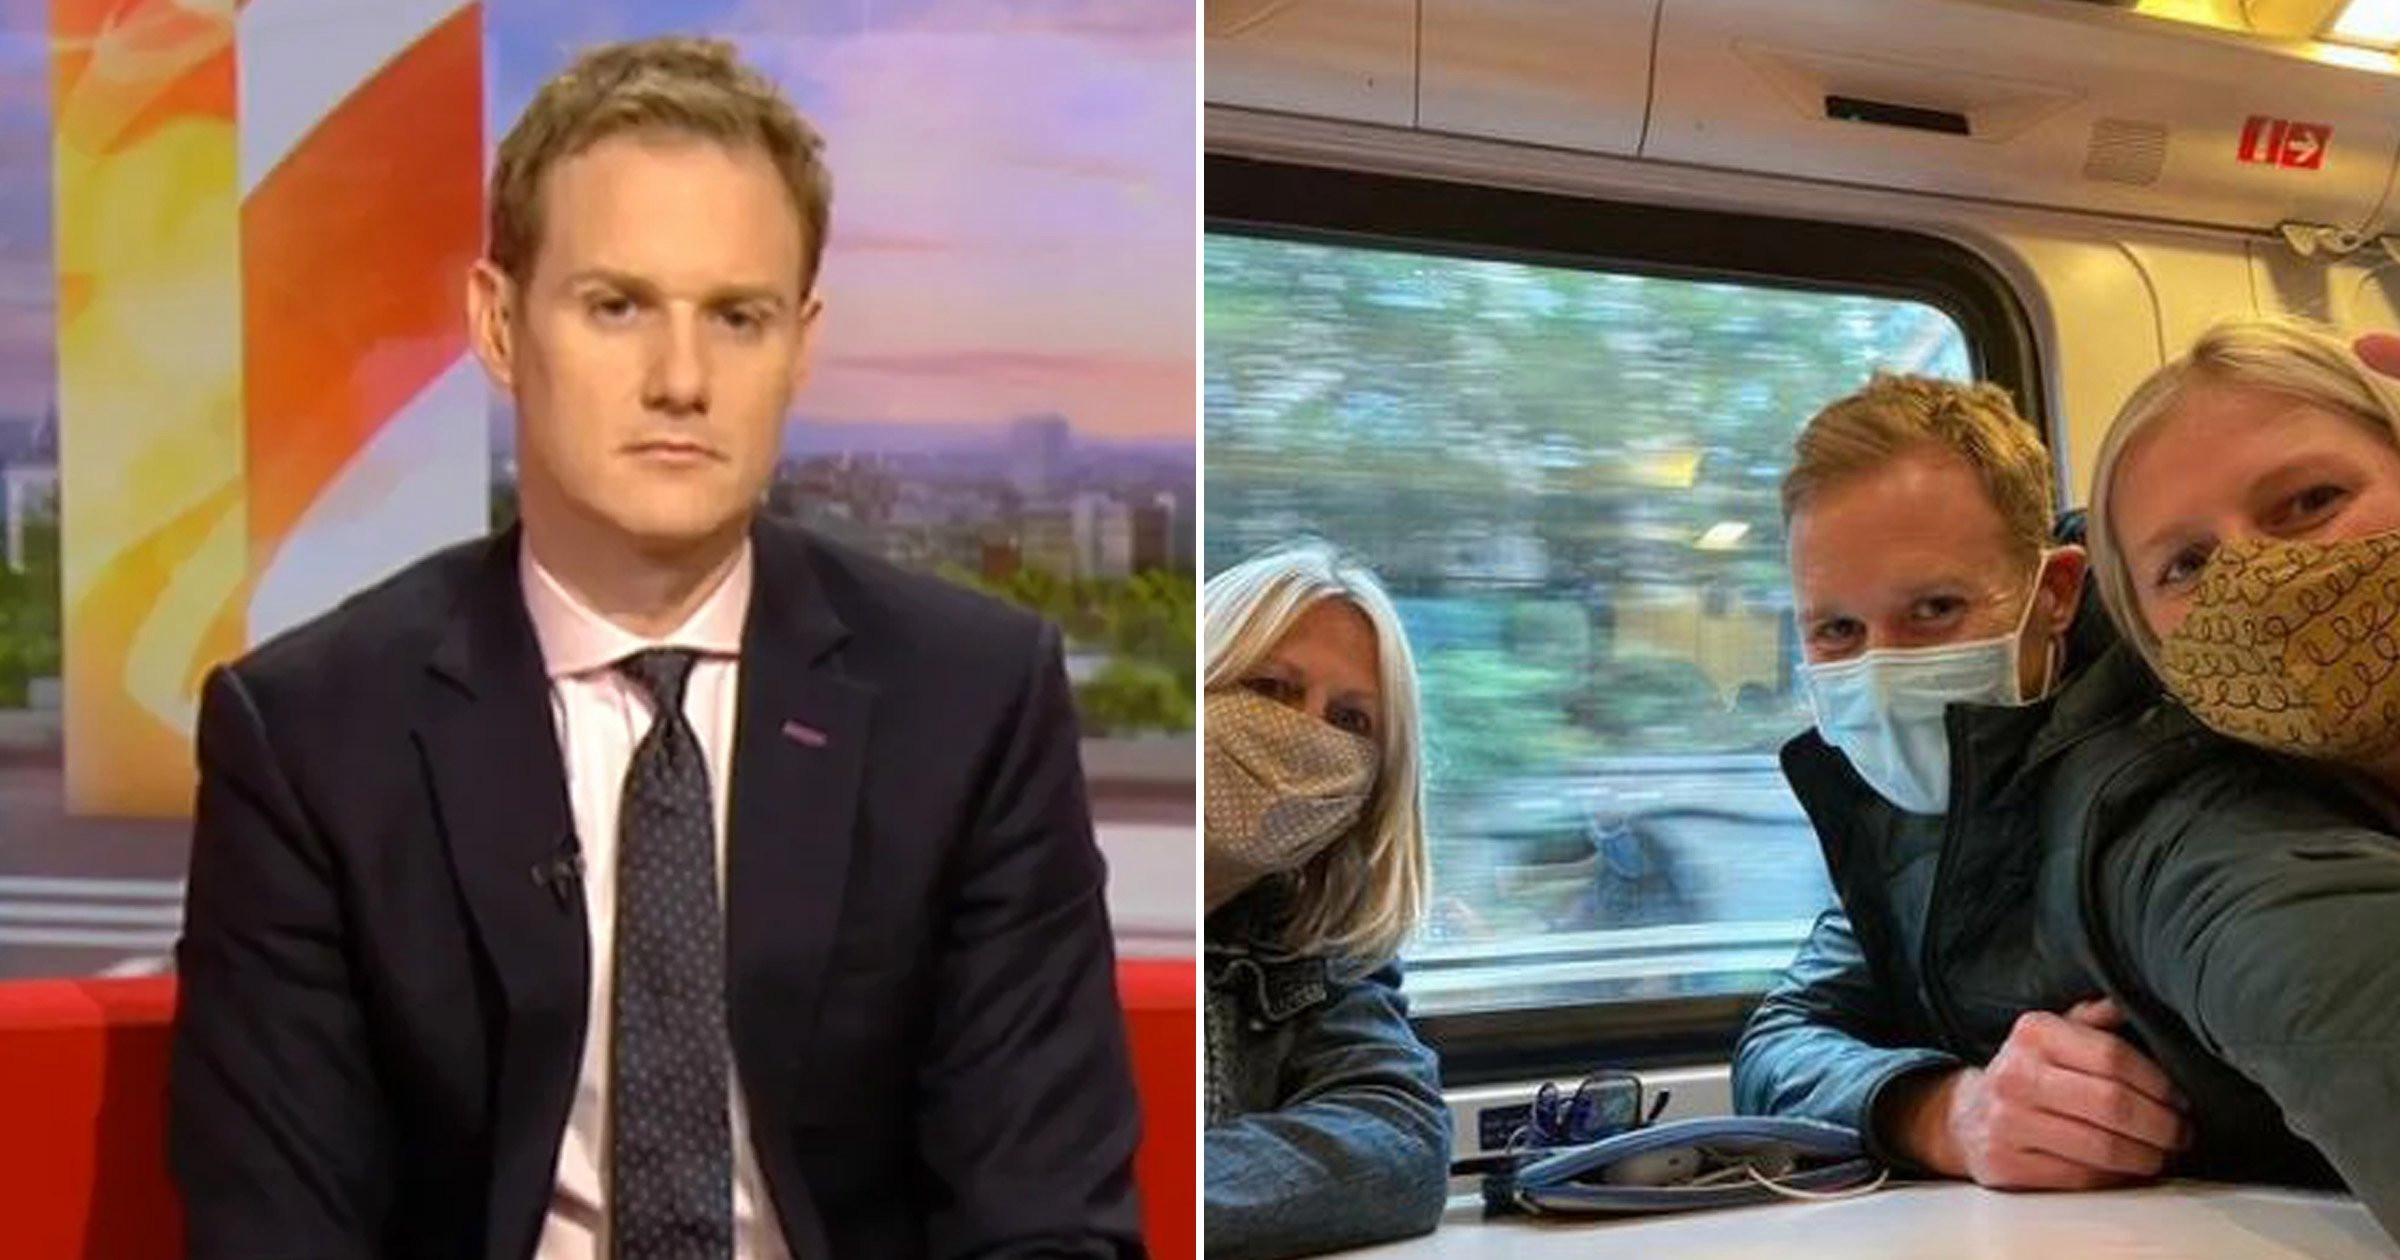 Dan Walker’s chaotic train journey home involves Strictly fans and a stag do